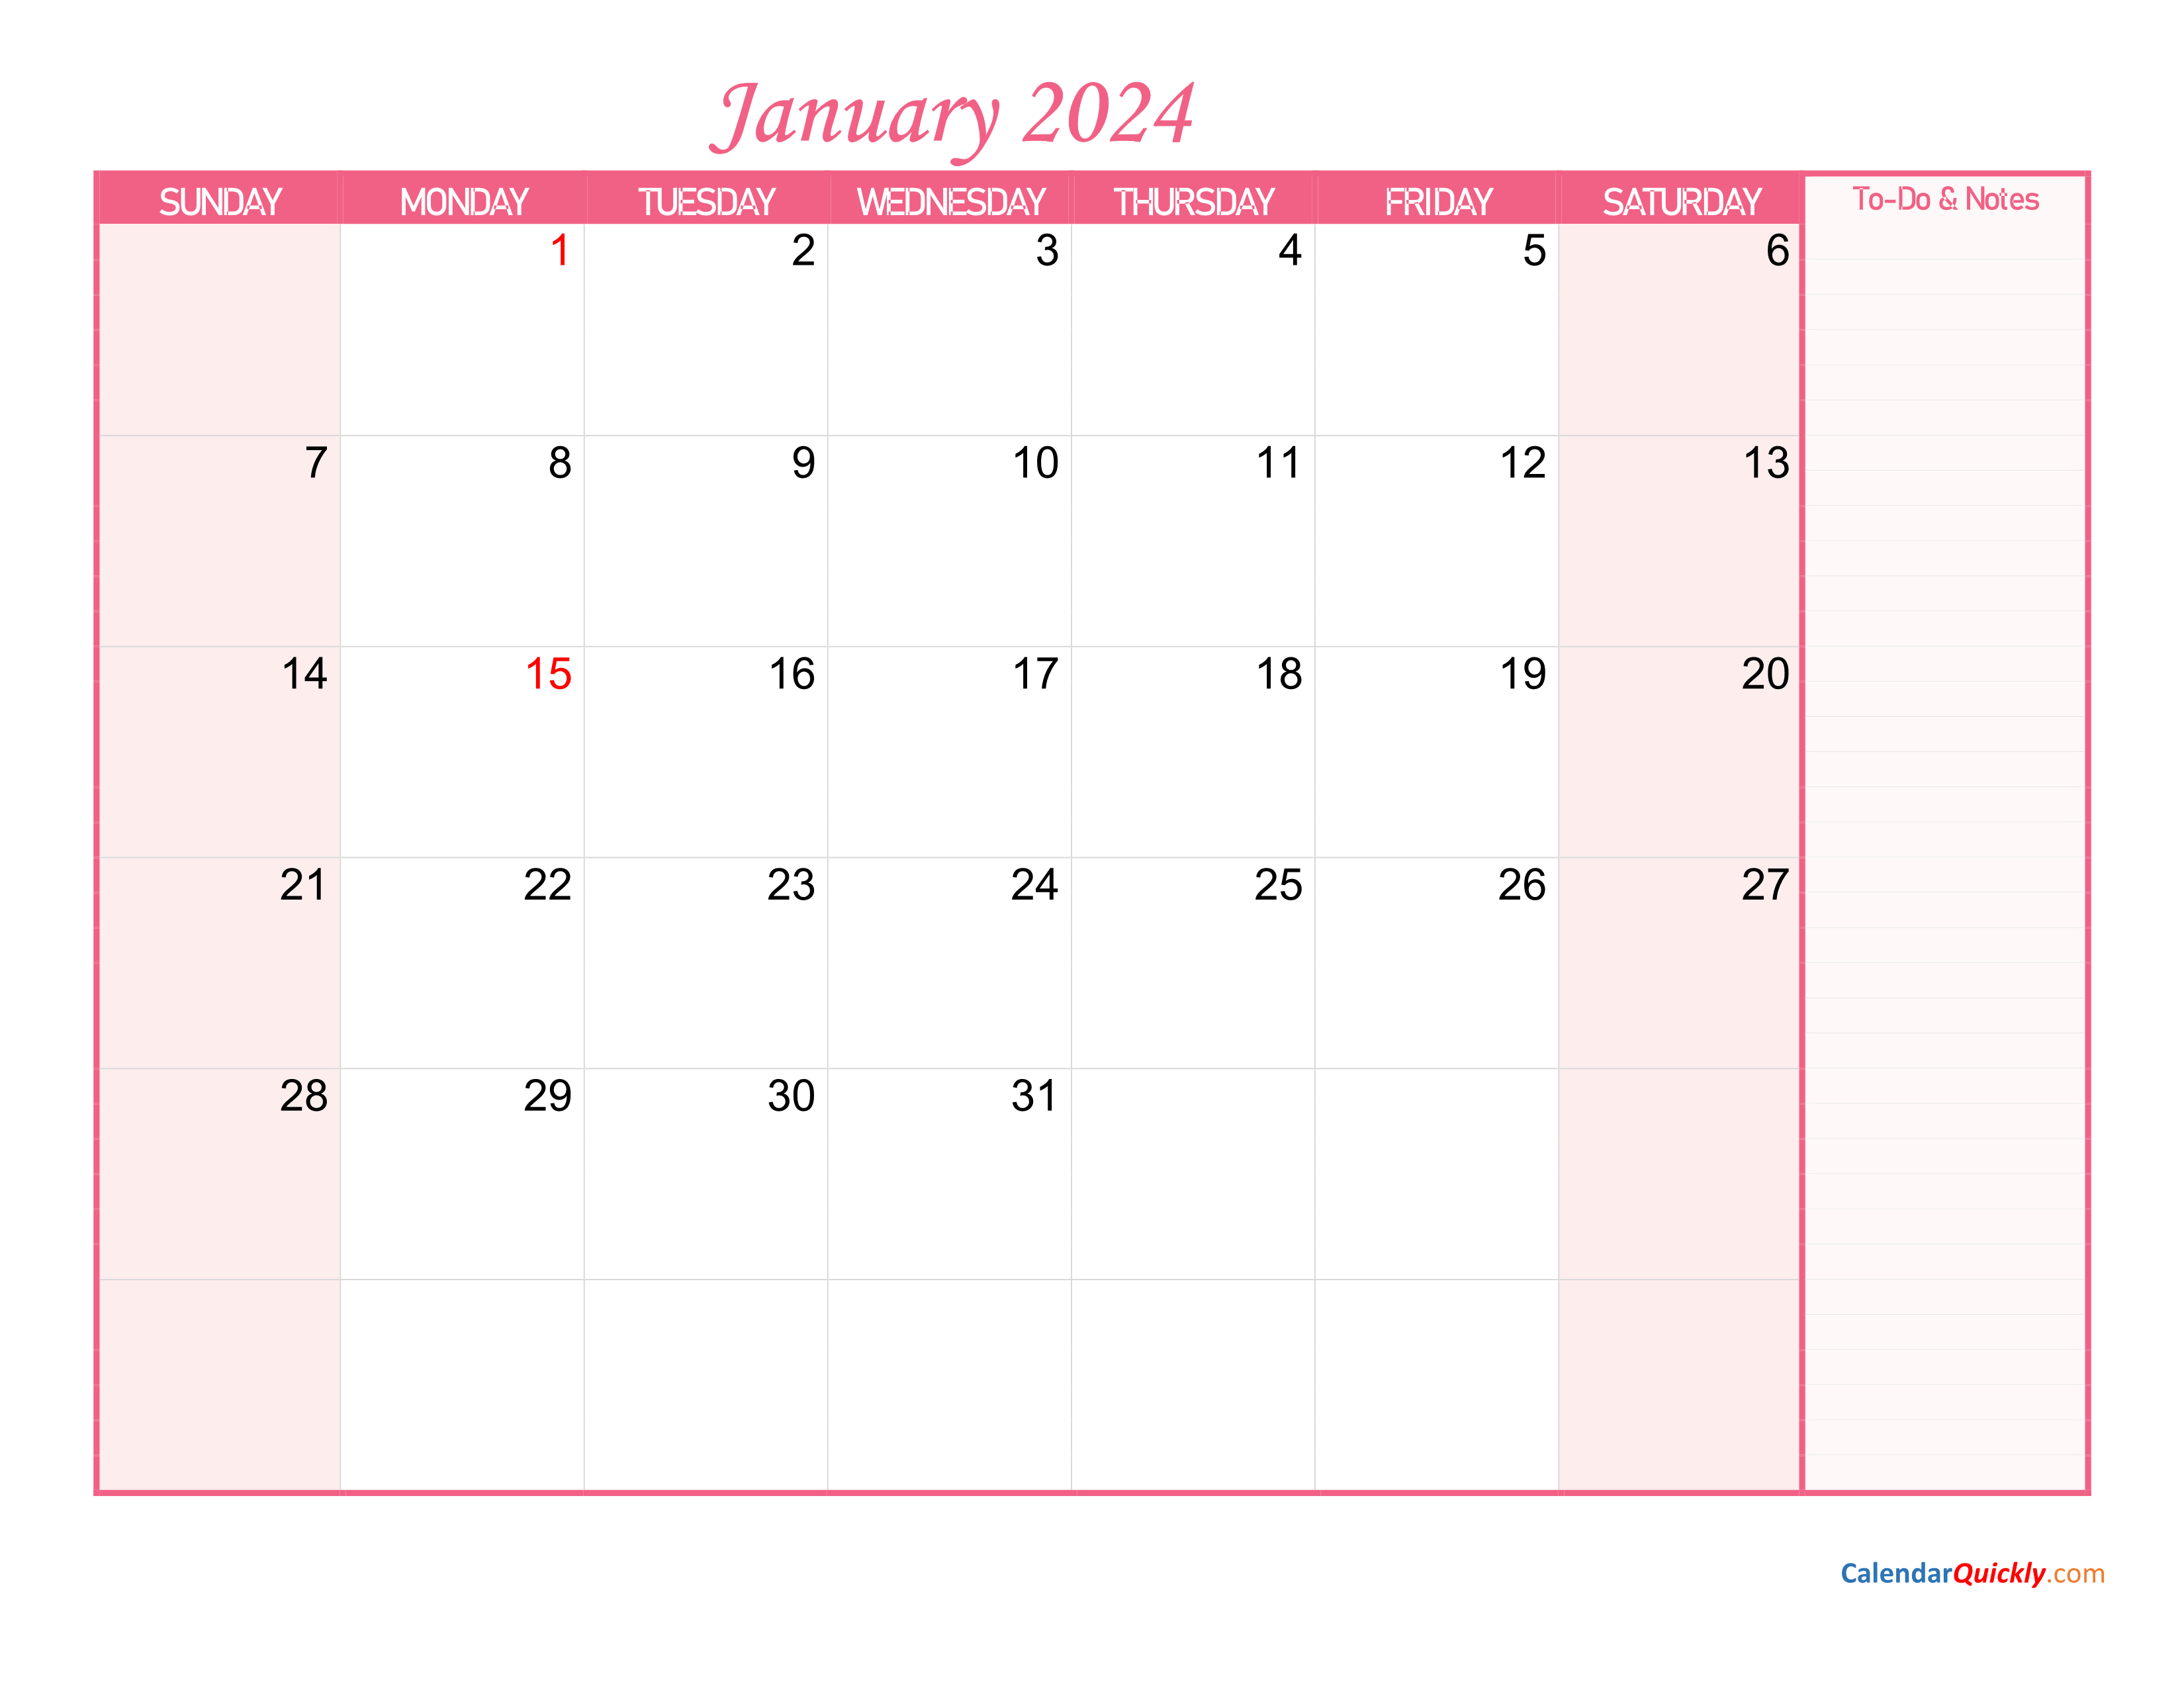 Monthly Calendar 2024 with Notes Calendar Quickly